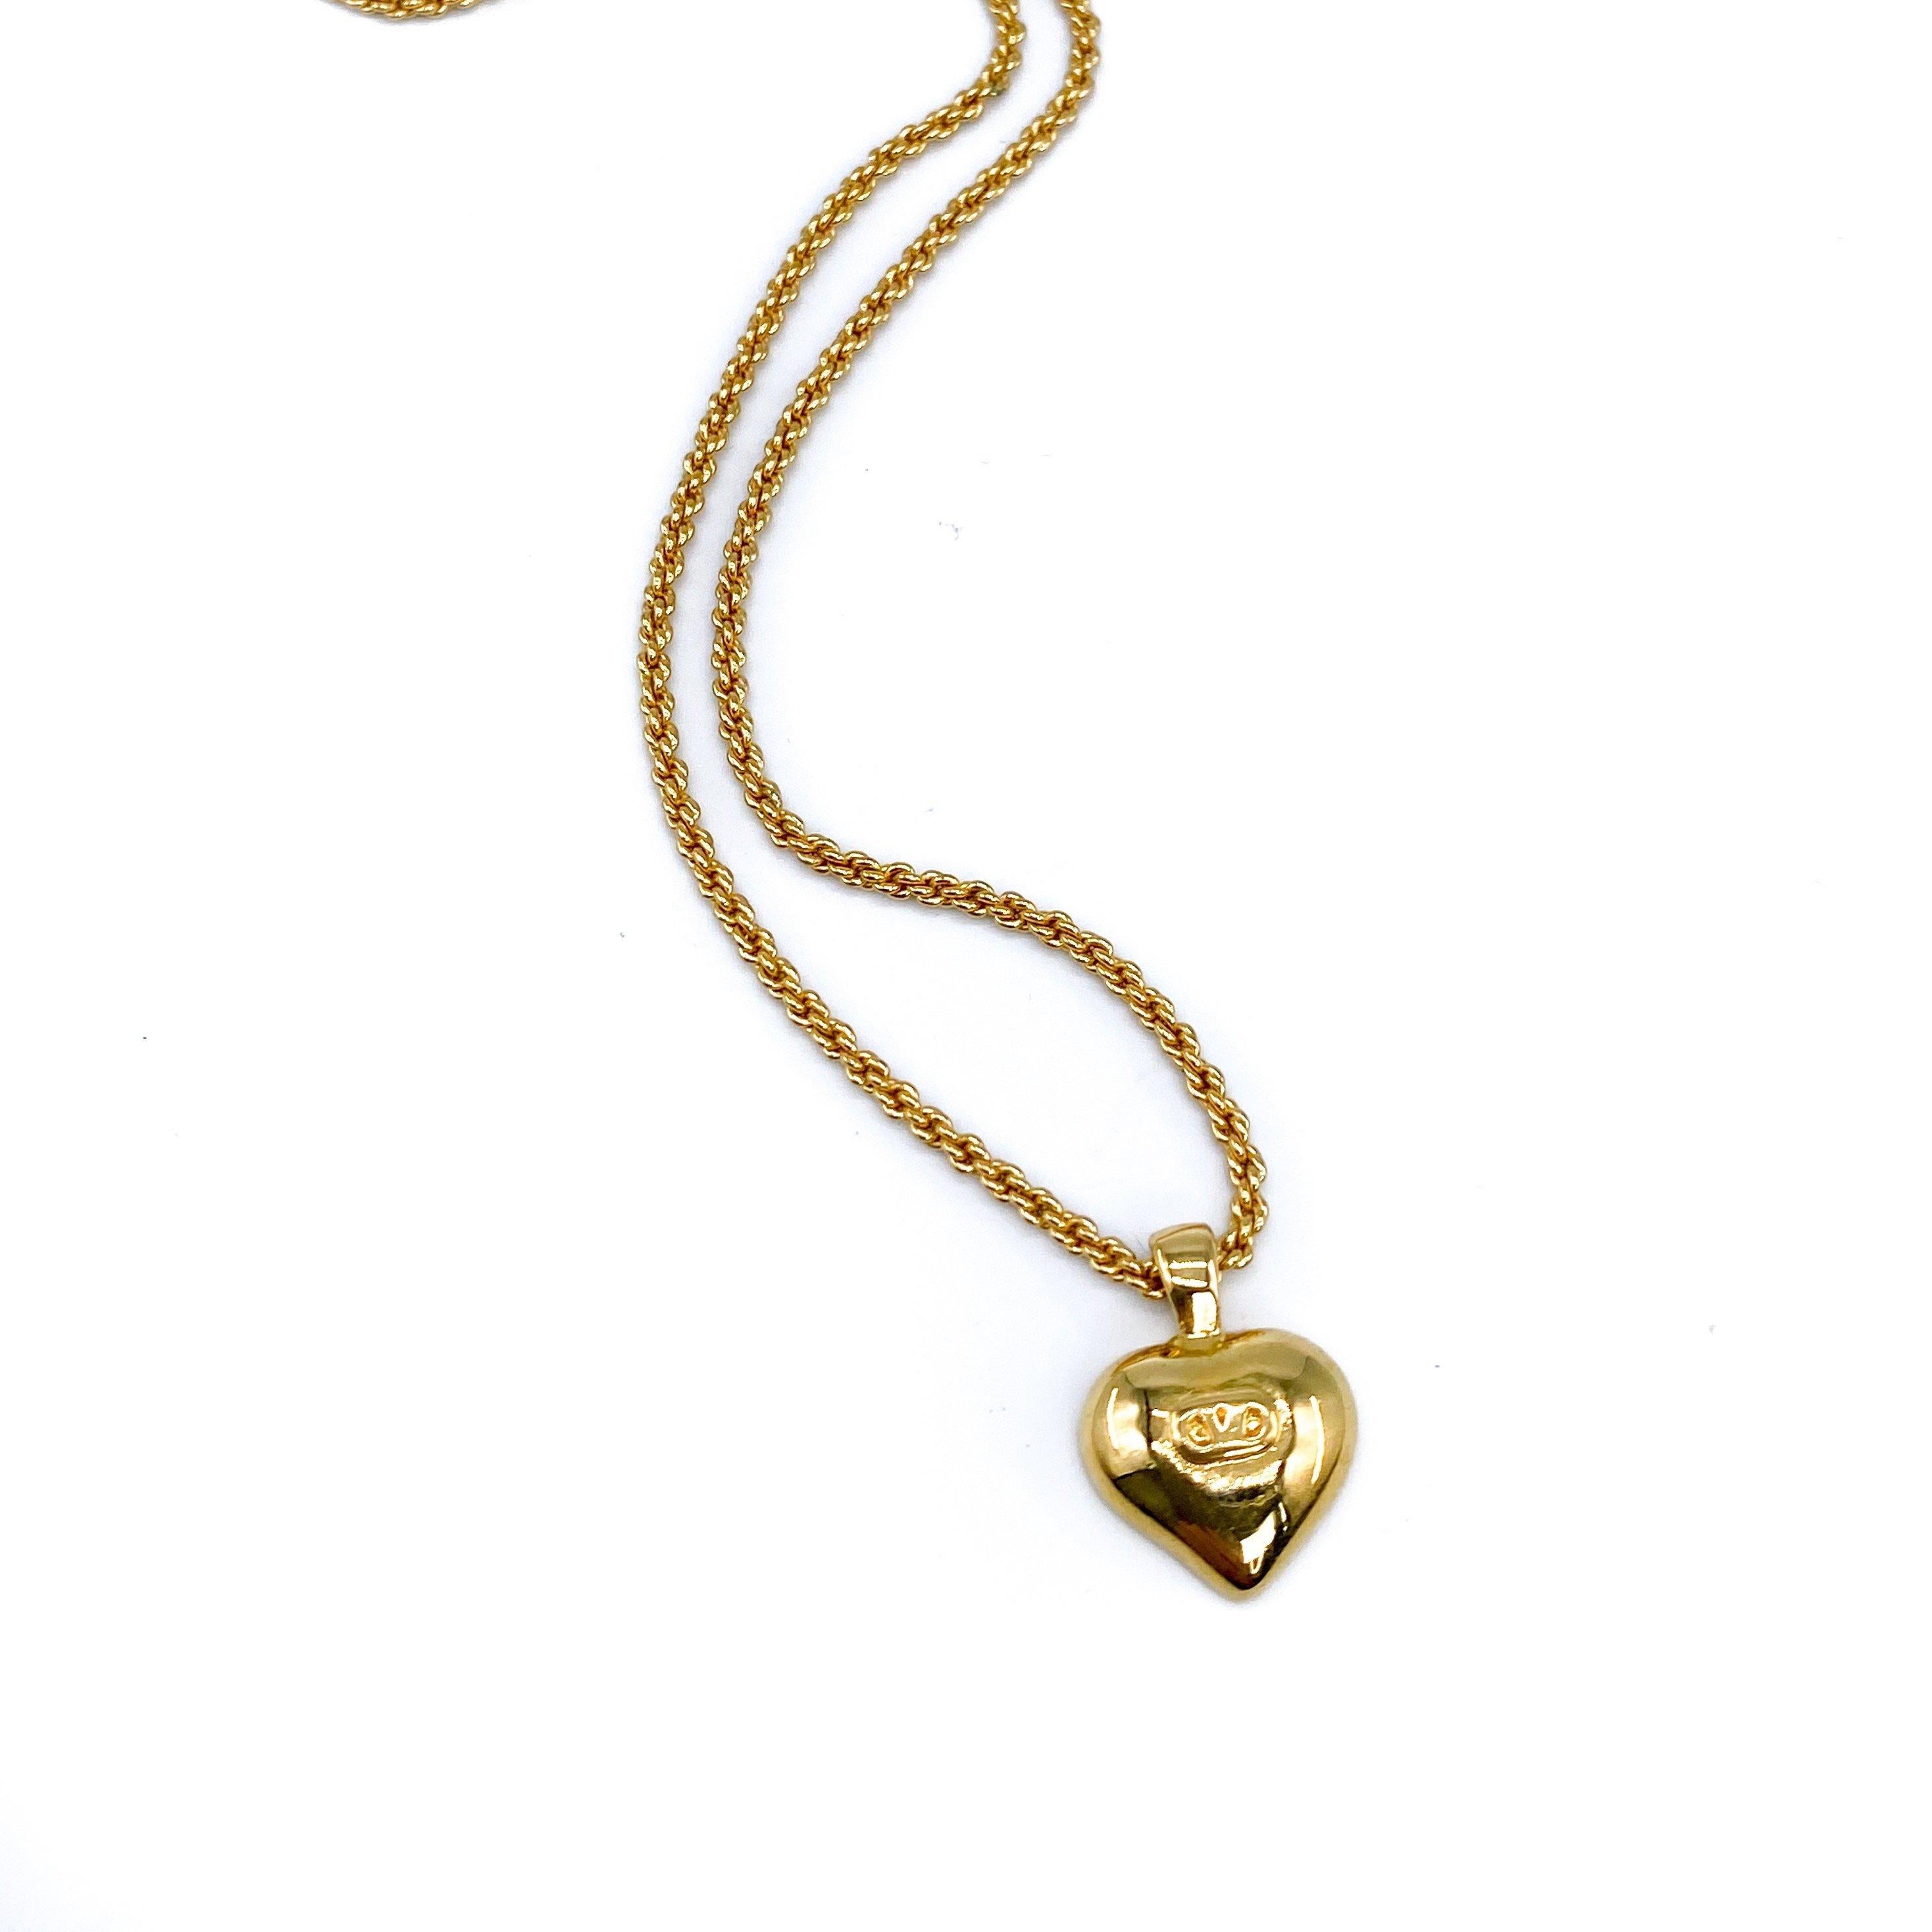 Valentino 1990s Vintage Heart Necklace

Detail
-Made in Italy in the 1990s
-Crafted from gold plated metal
-Delicate chain with small heart pendant embossed with the iconic Valentino V

Size & Fit
-Chain measures approx 16 inches
-Pendant measures